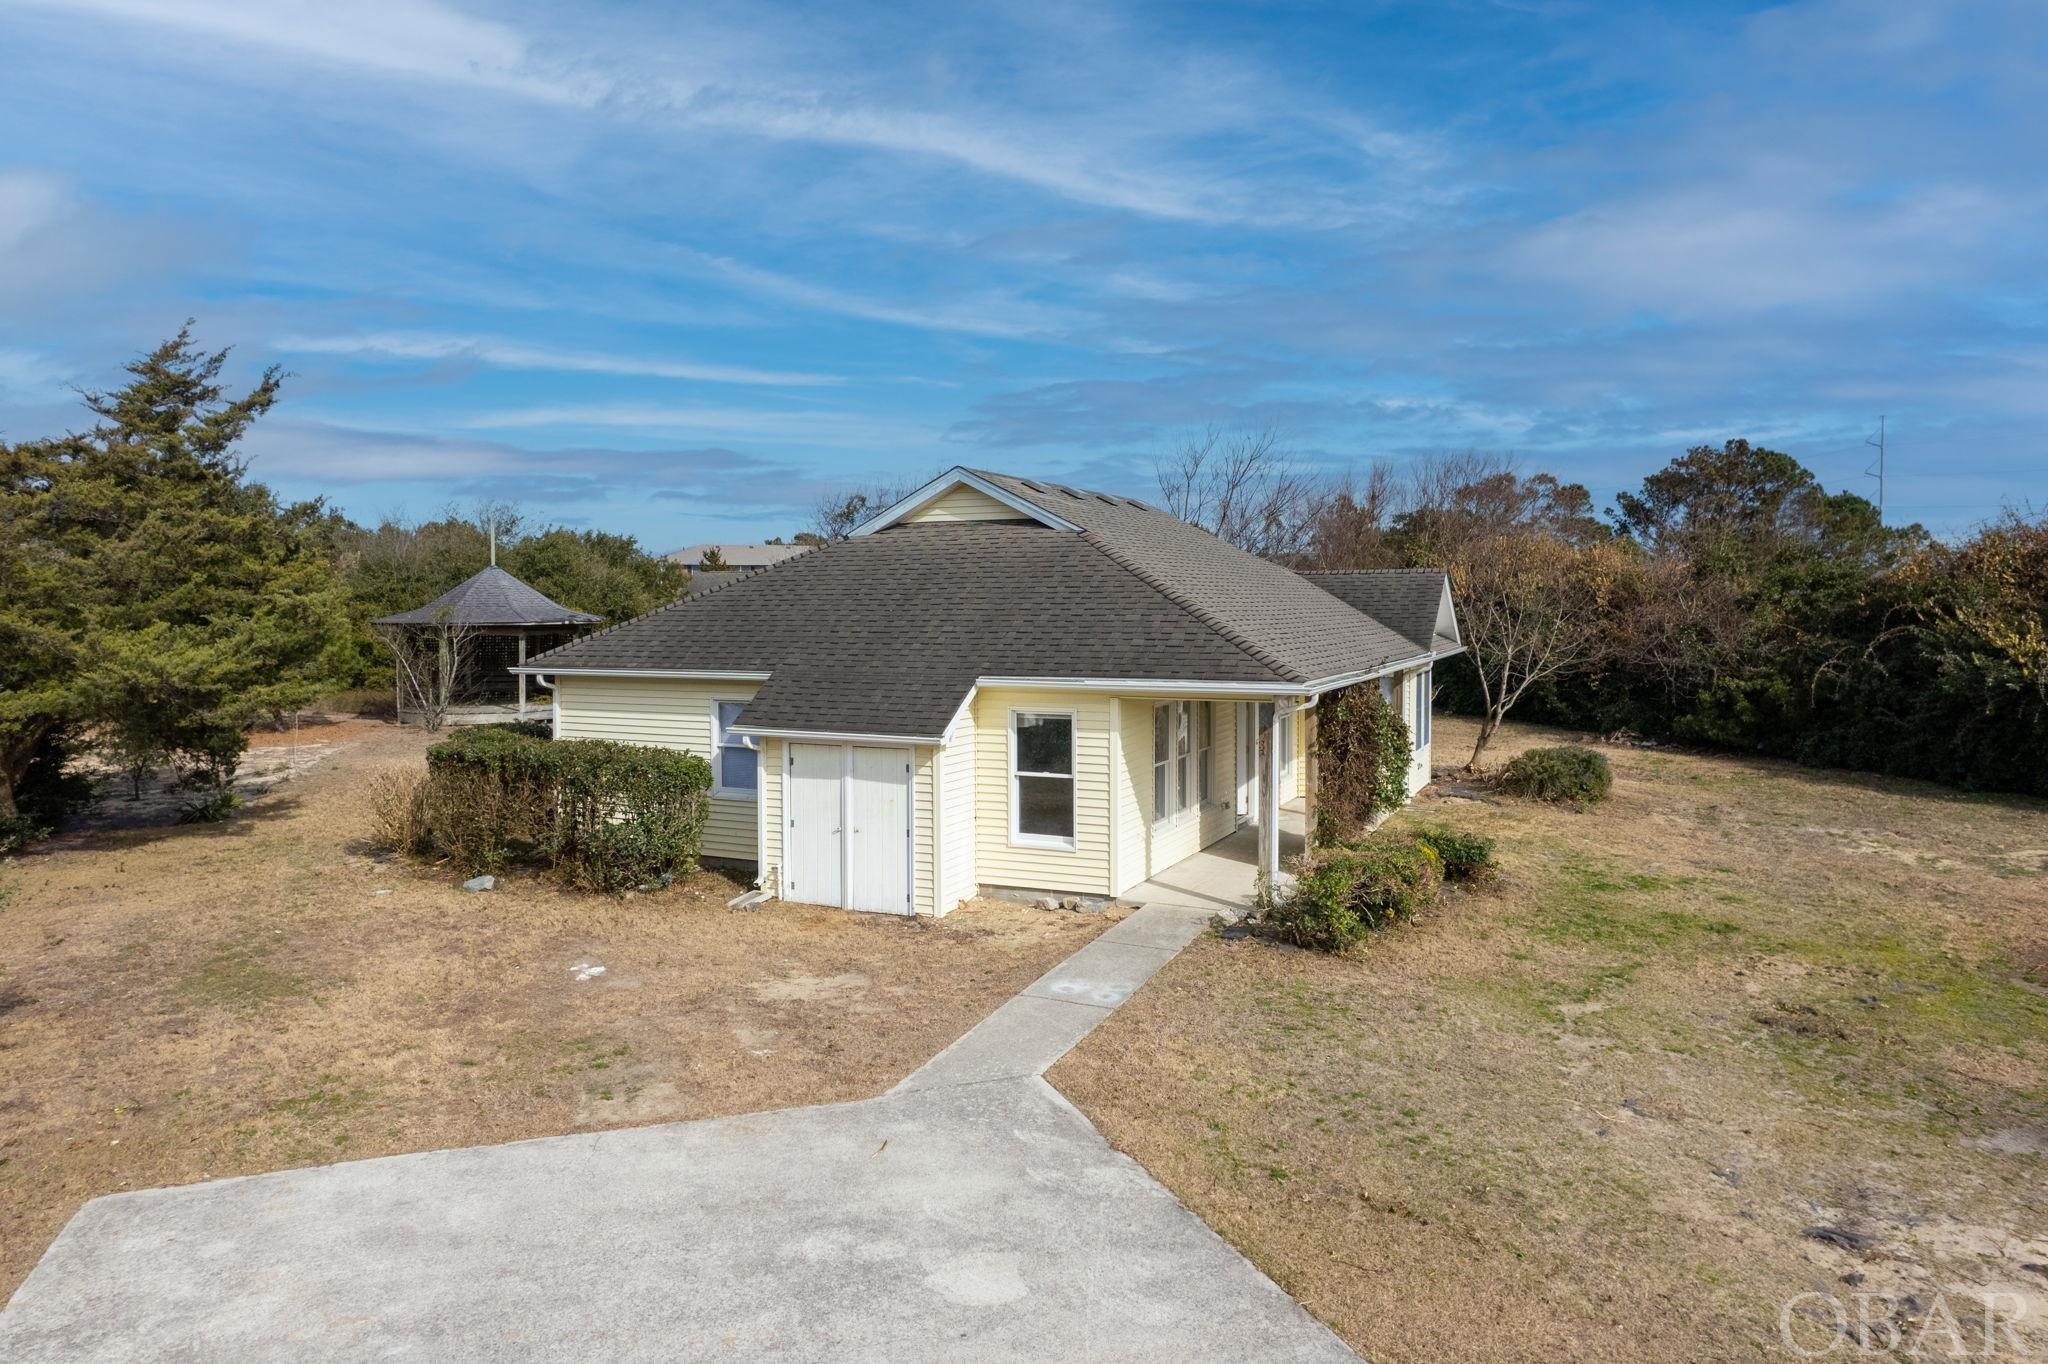 3909 Shelby Avenue, Kitty Hawk, NC 27949, 3 Bedrooms Bedrooms, ,2 BathroomsBathrooms,Residential,For sale,Shelby Avenue,124925